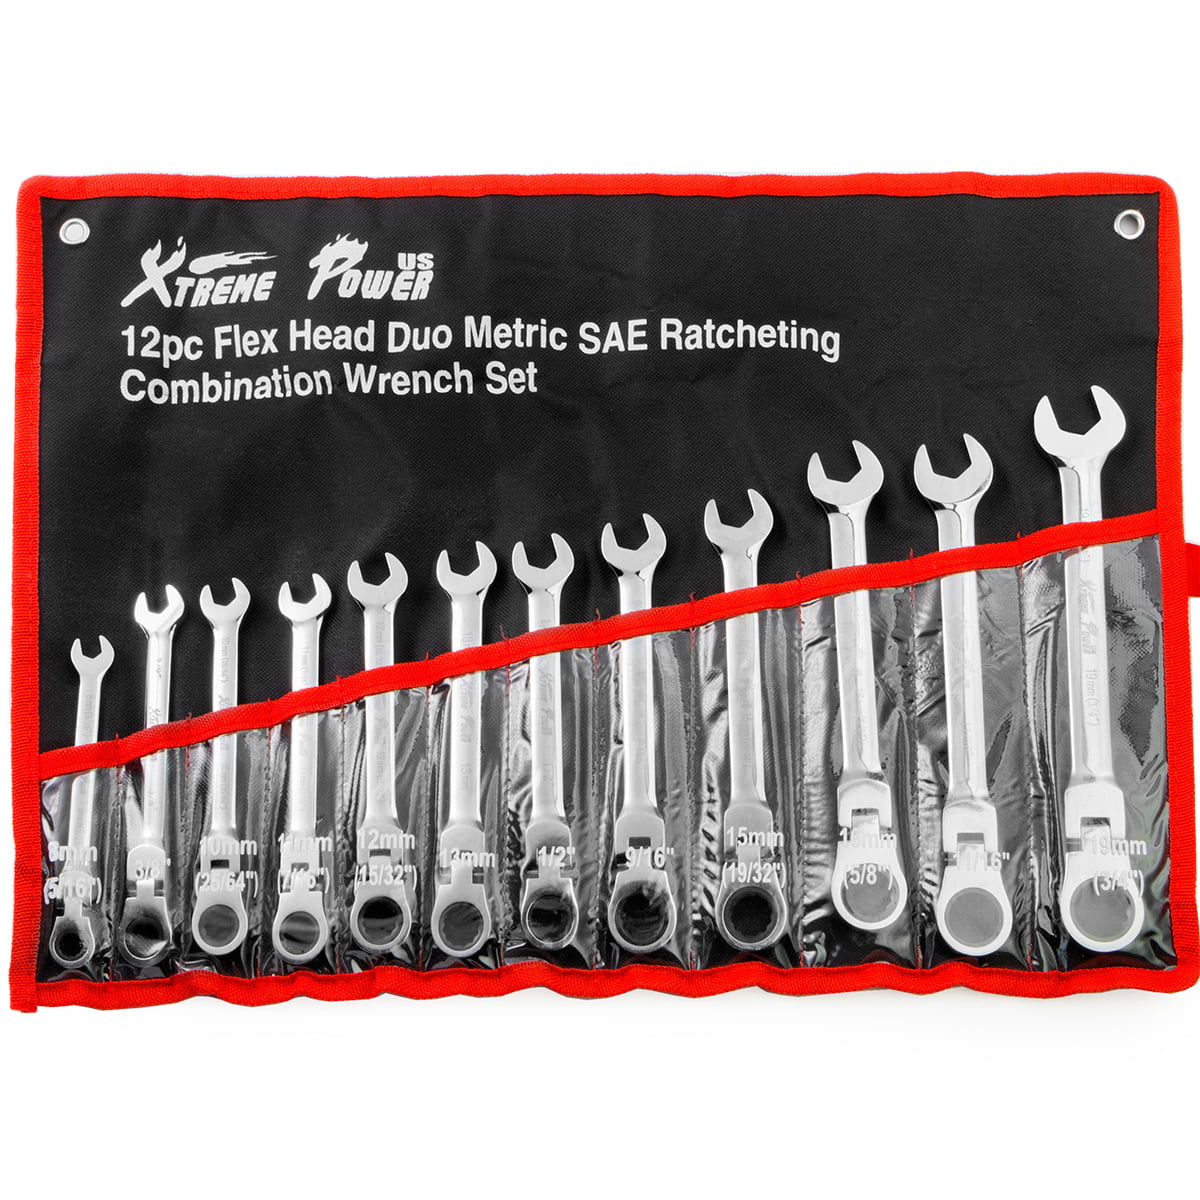 Renewed Crescent Brand CX6RWS7 7 Pc X6 SAE Open End Ratcheting Wrench Set